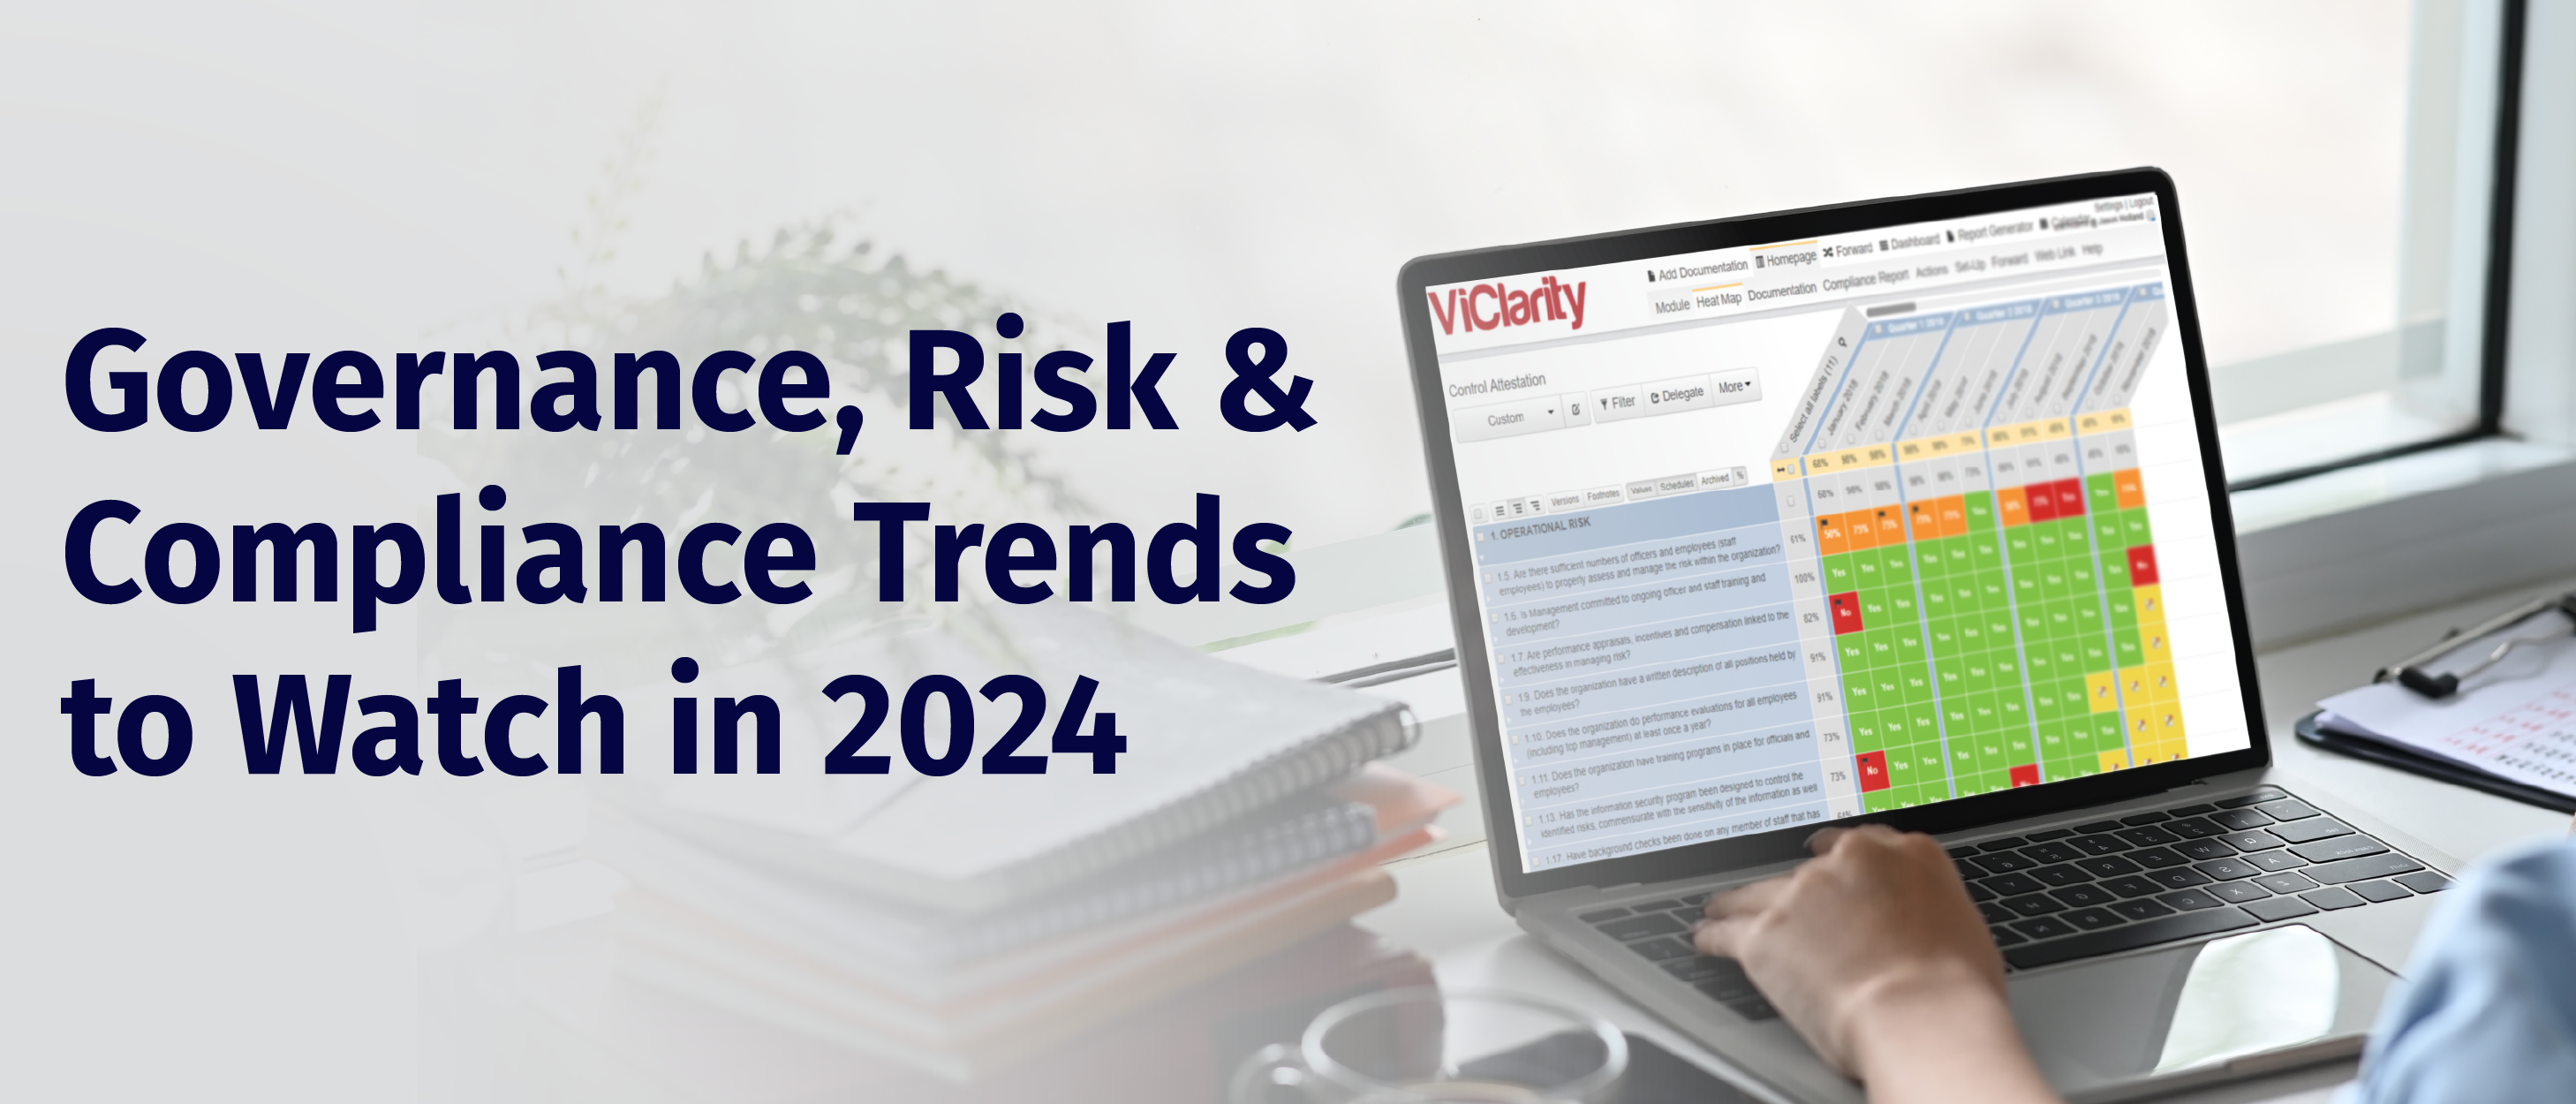 Governance, Risk & Compliance Trends to Watch in 2024